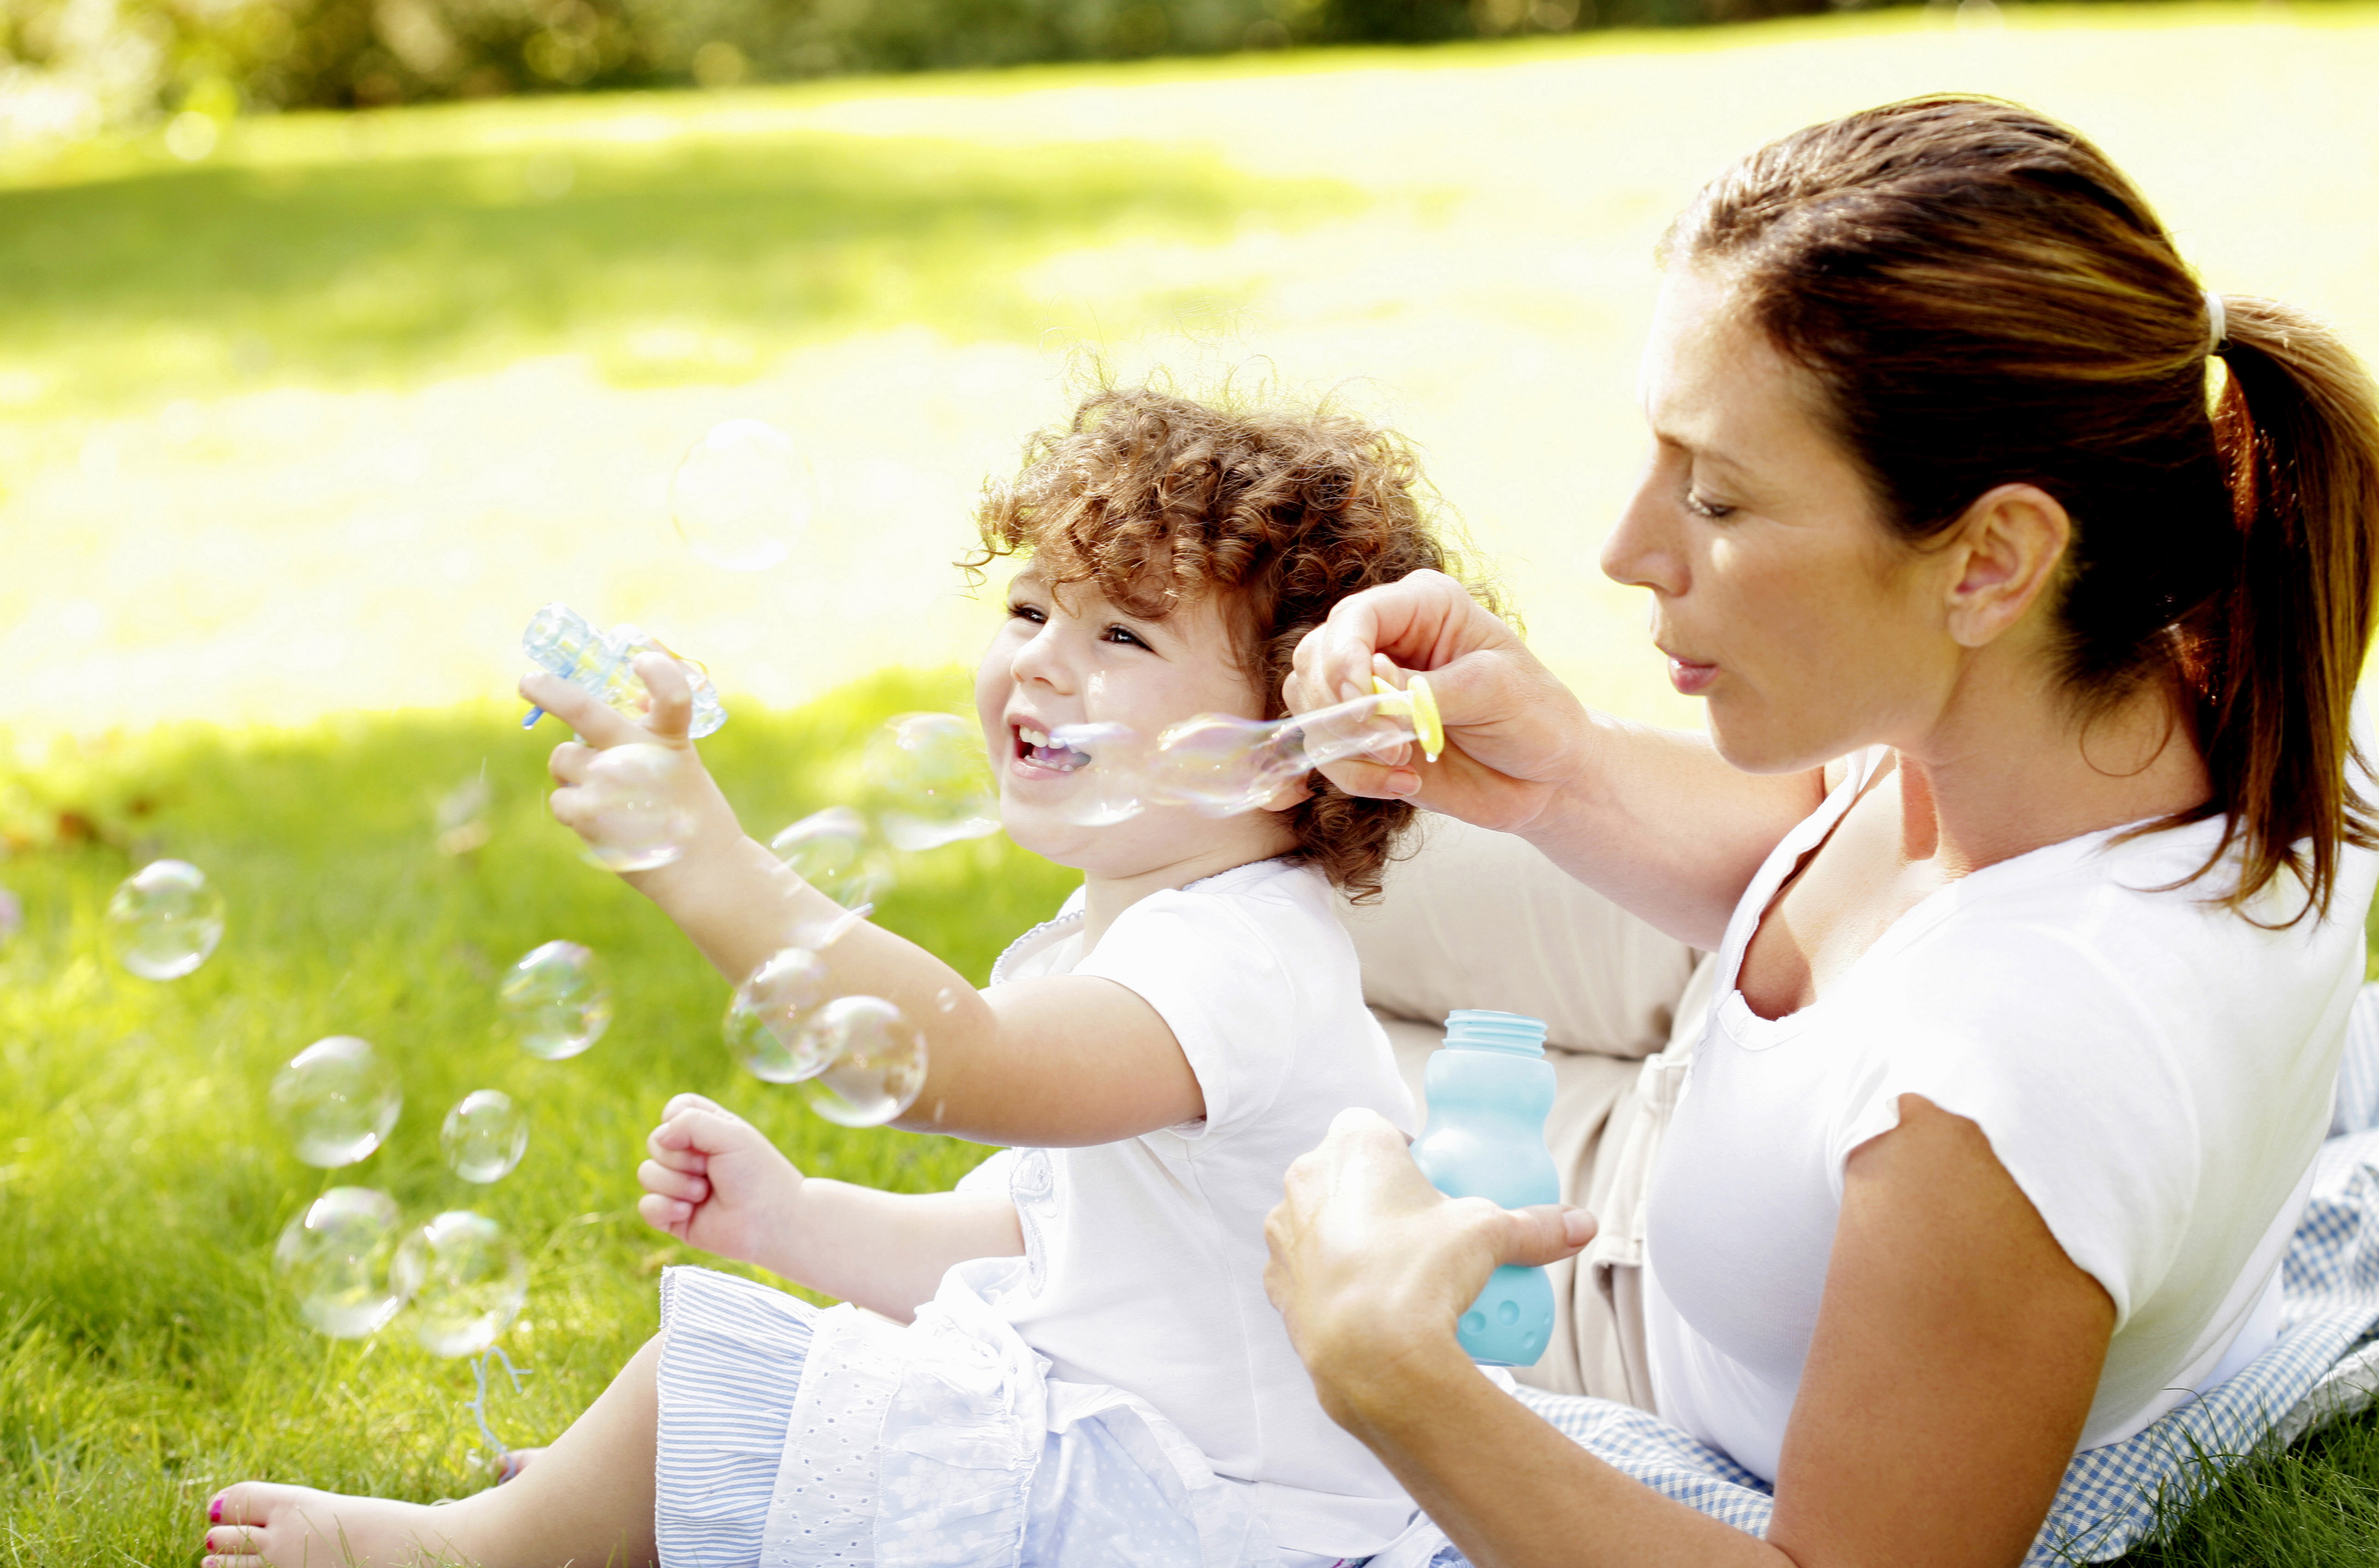 mom and young child smiling and blowing bubbles together